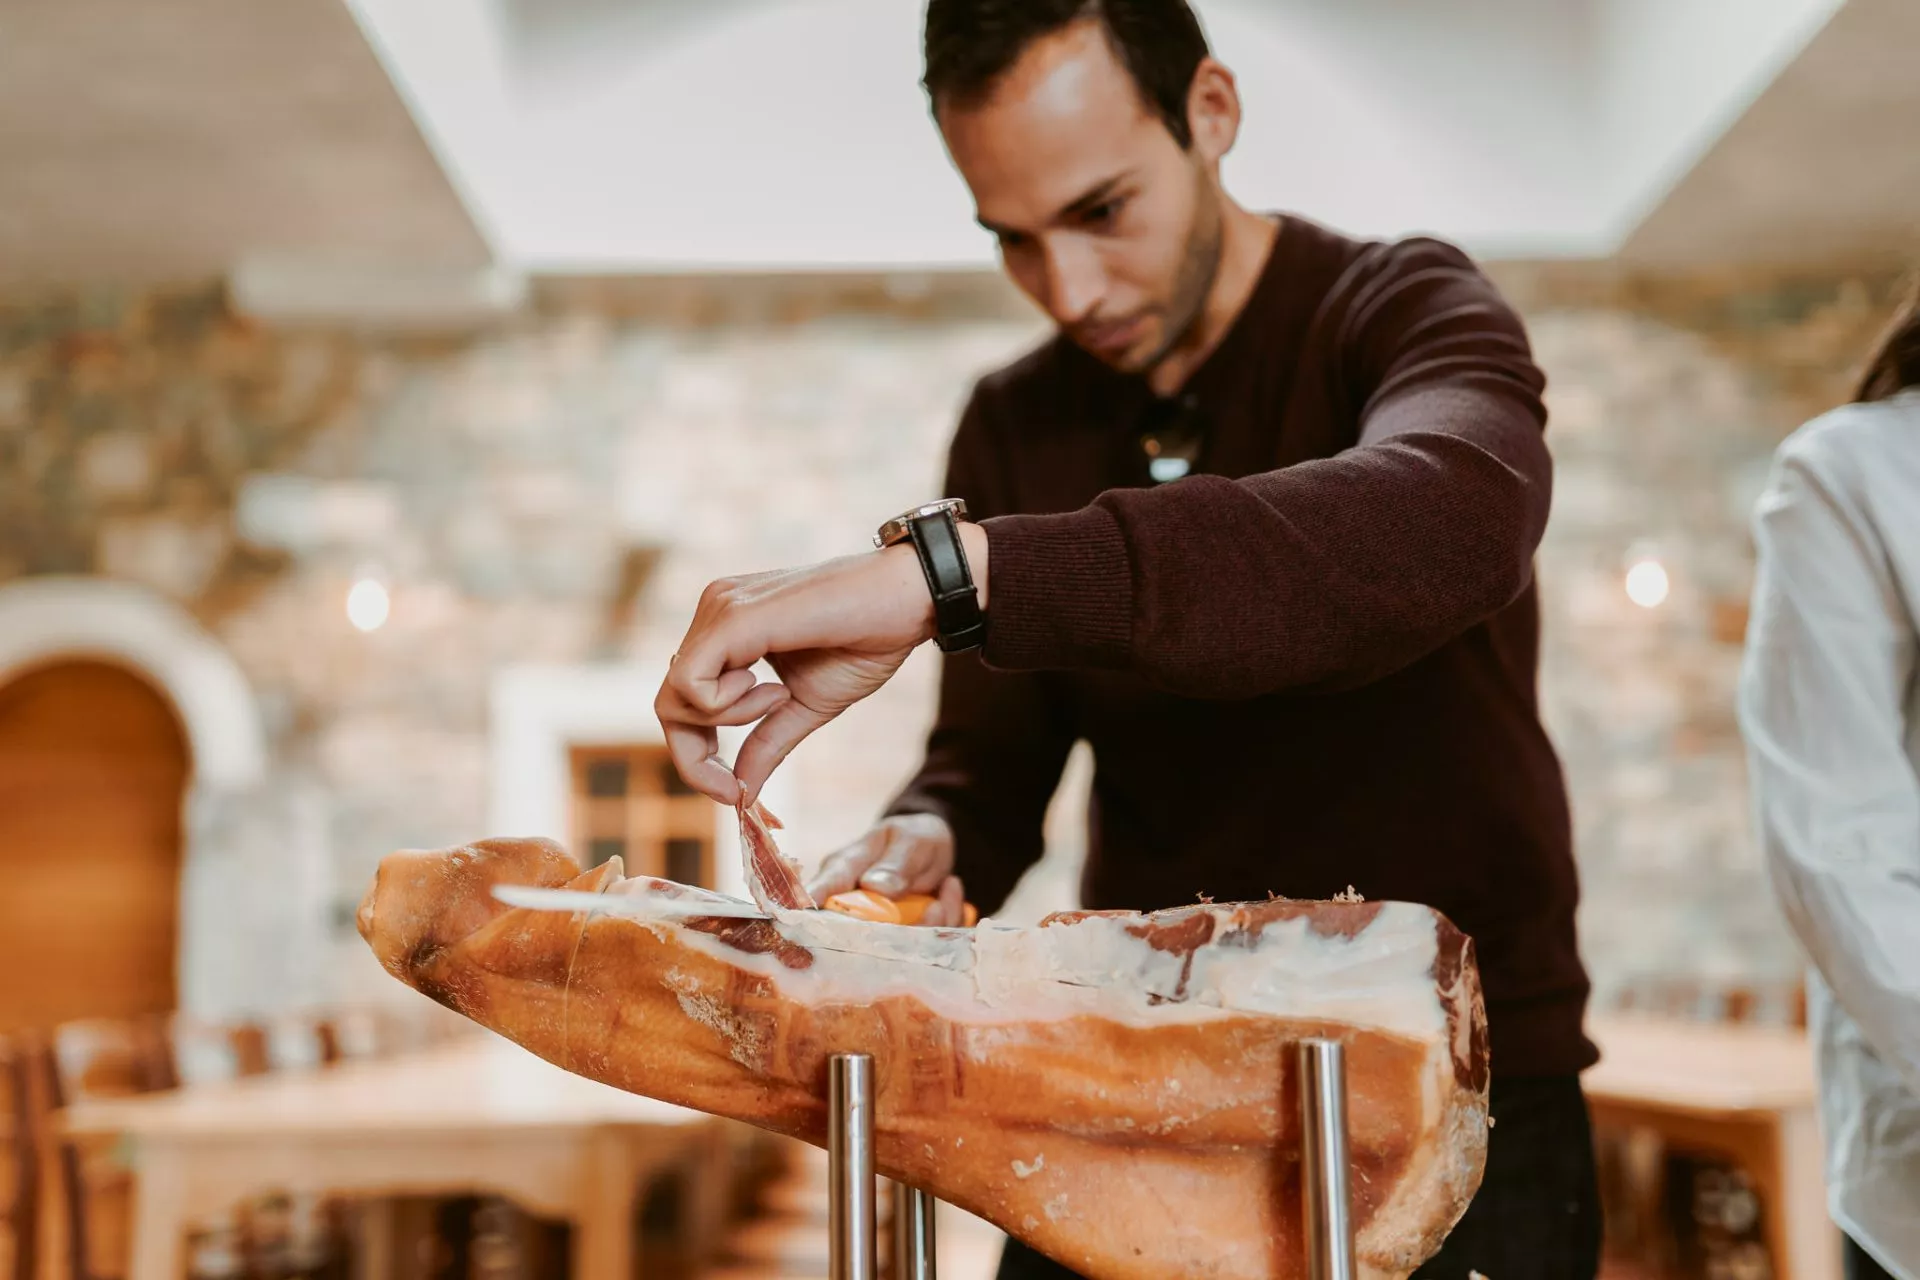 Let the Karst Prosciutto melt in your mouth